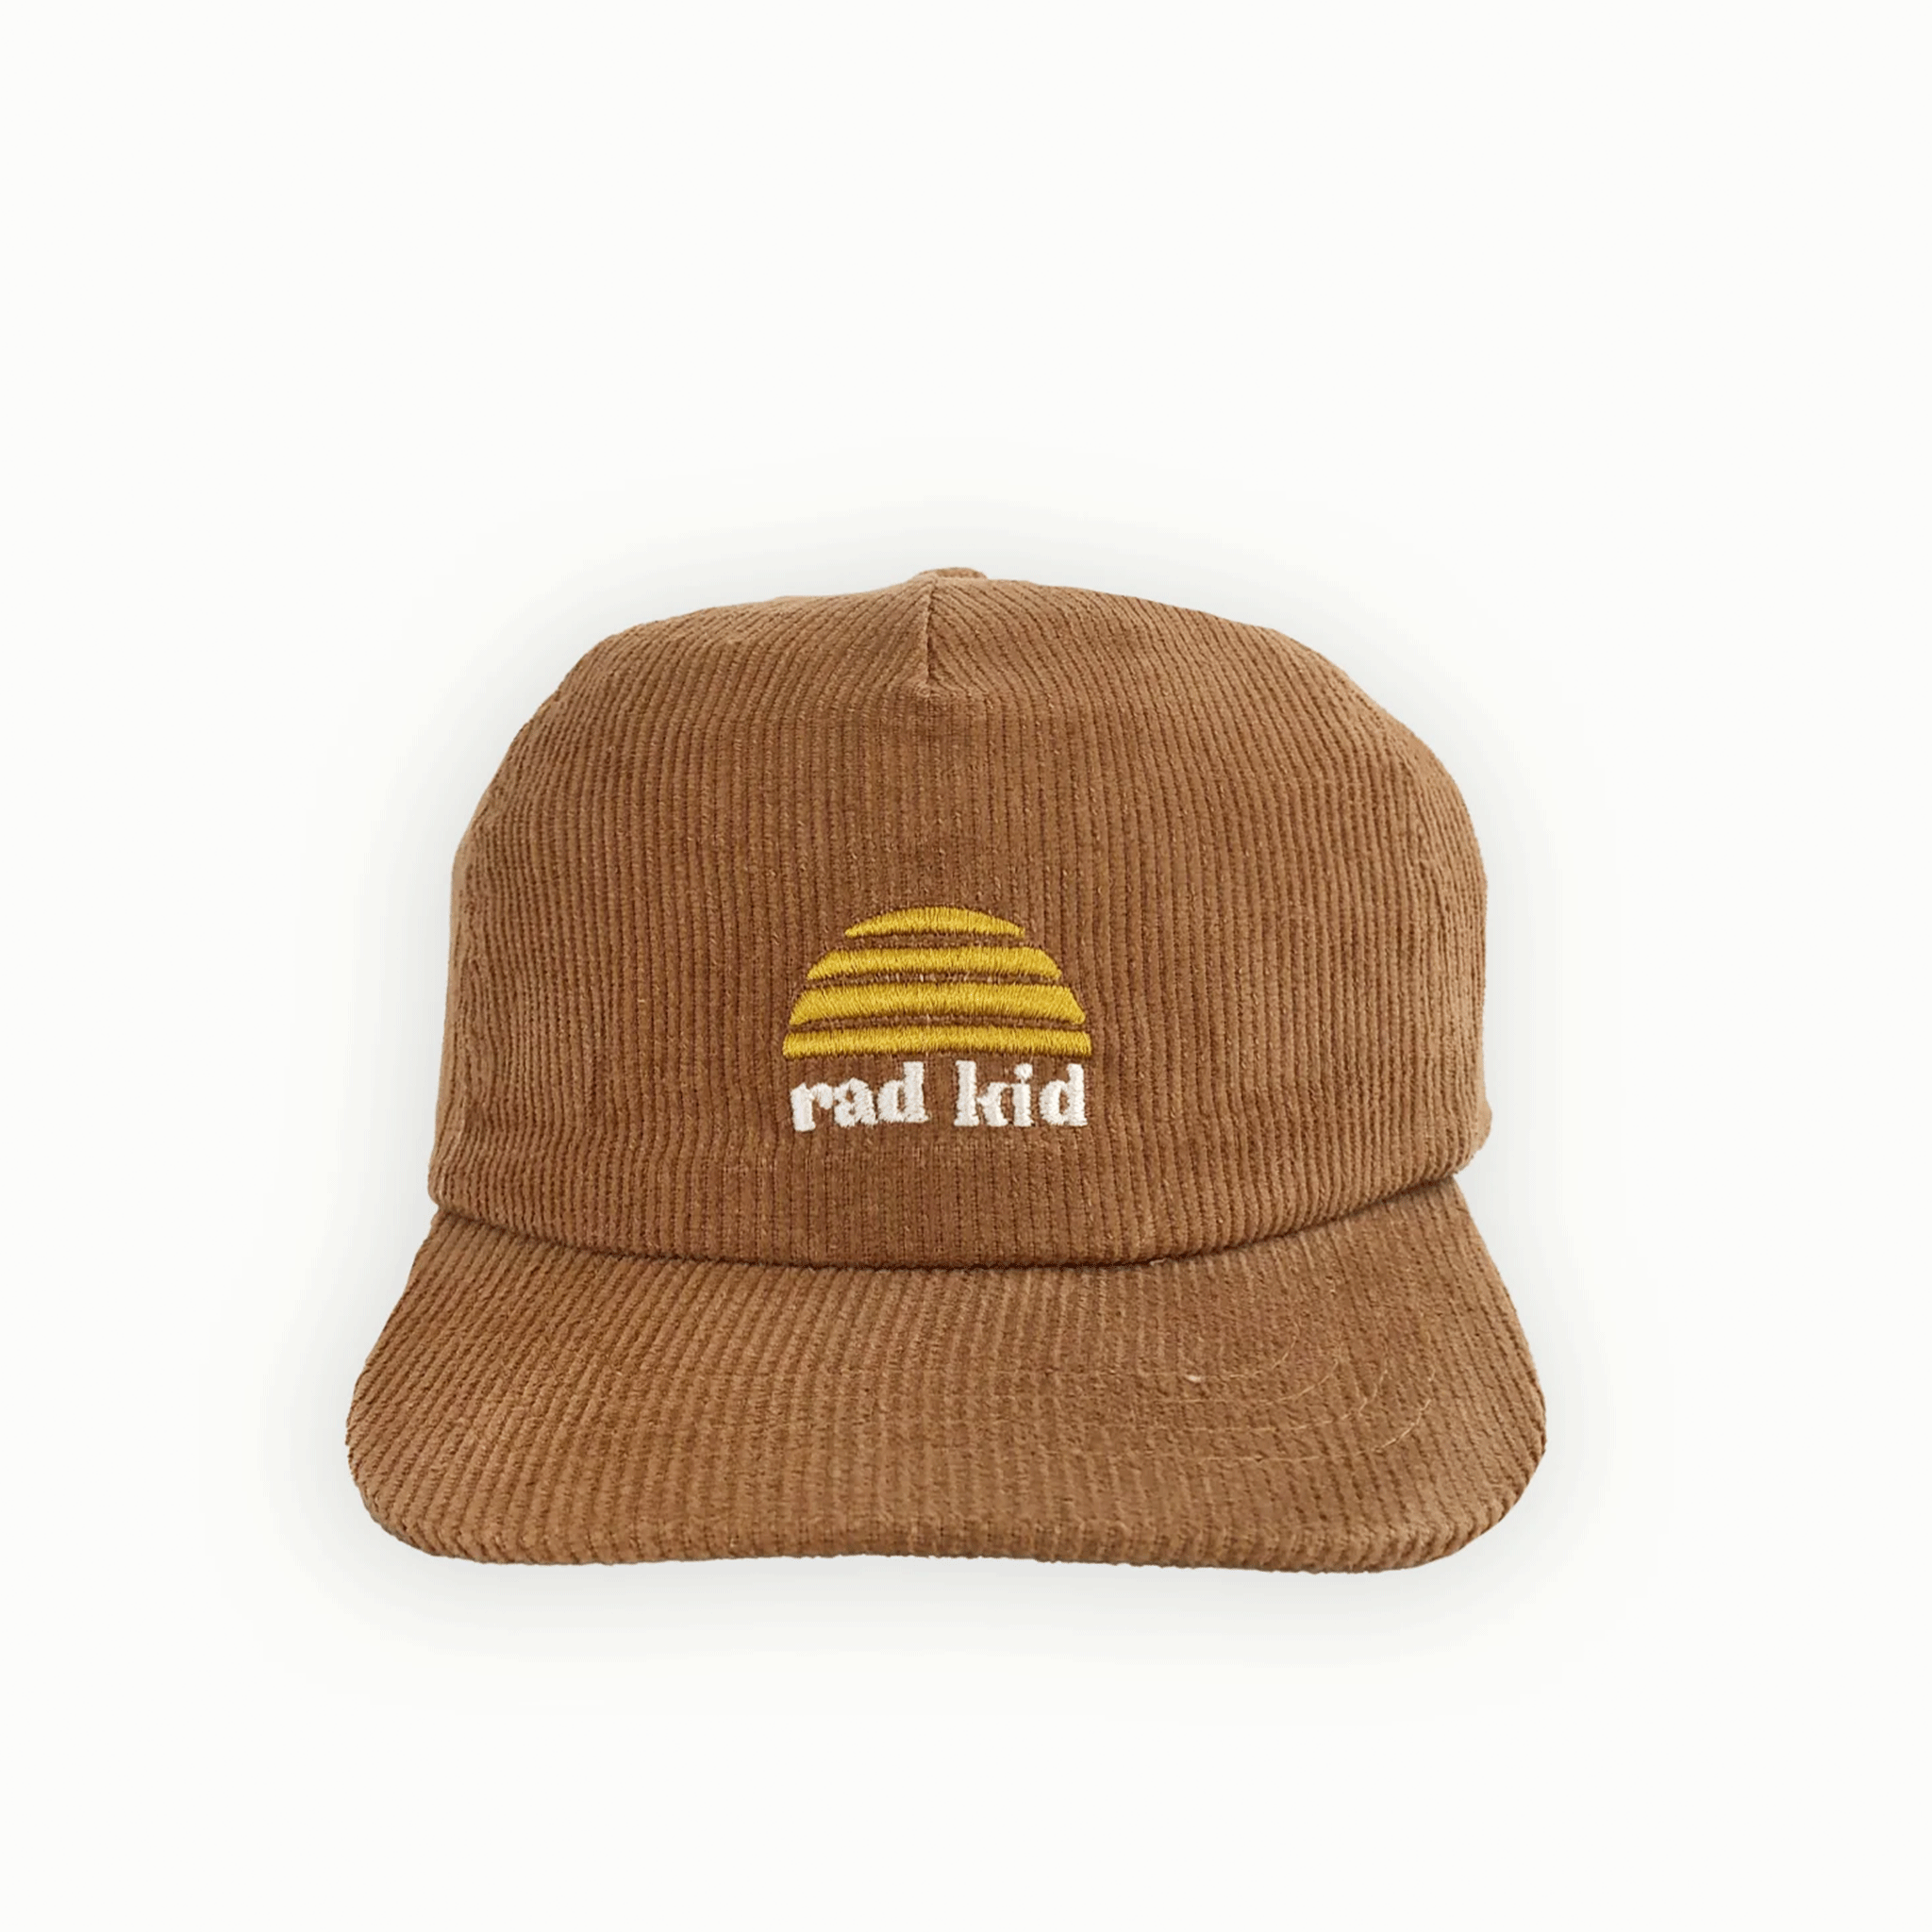 On a white background is a tan corduroy hat with a yellow sun logo and white text below it that reads, &quot;rad kid&quot;.